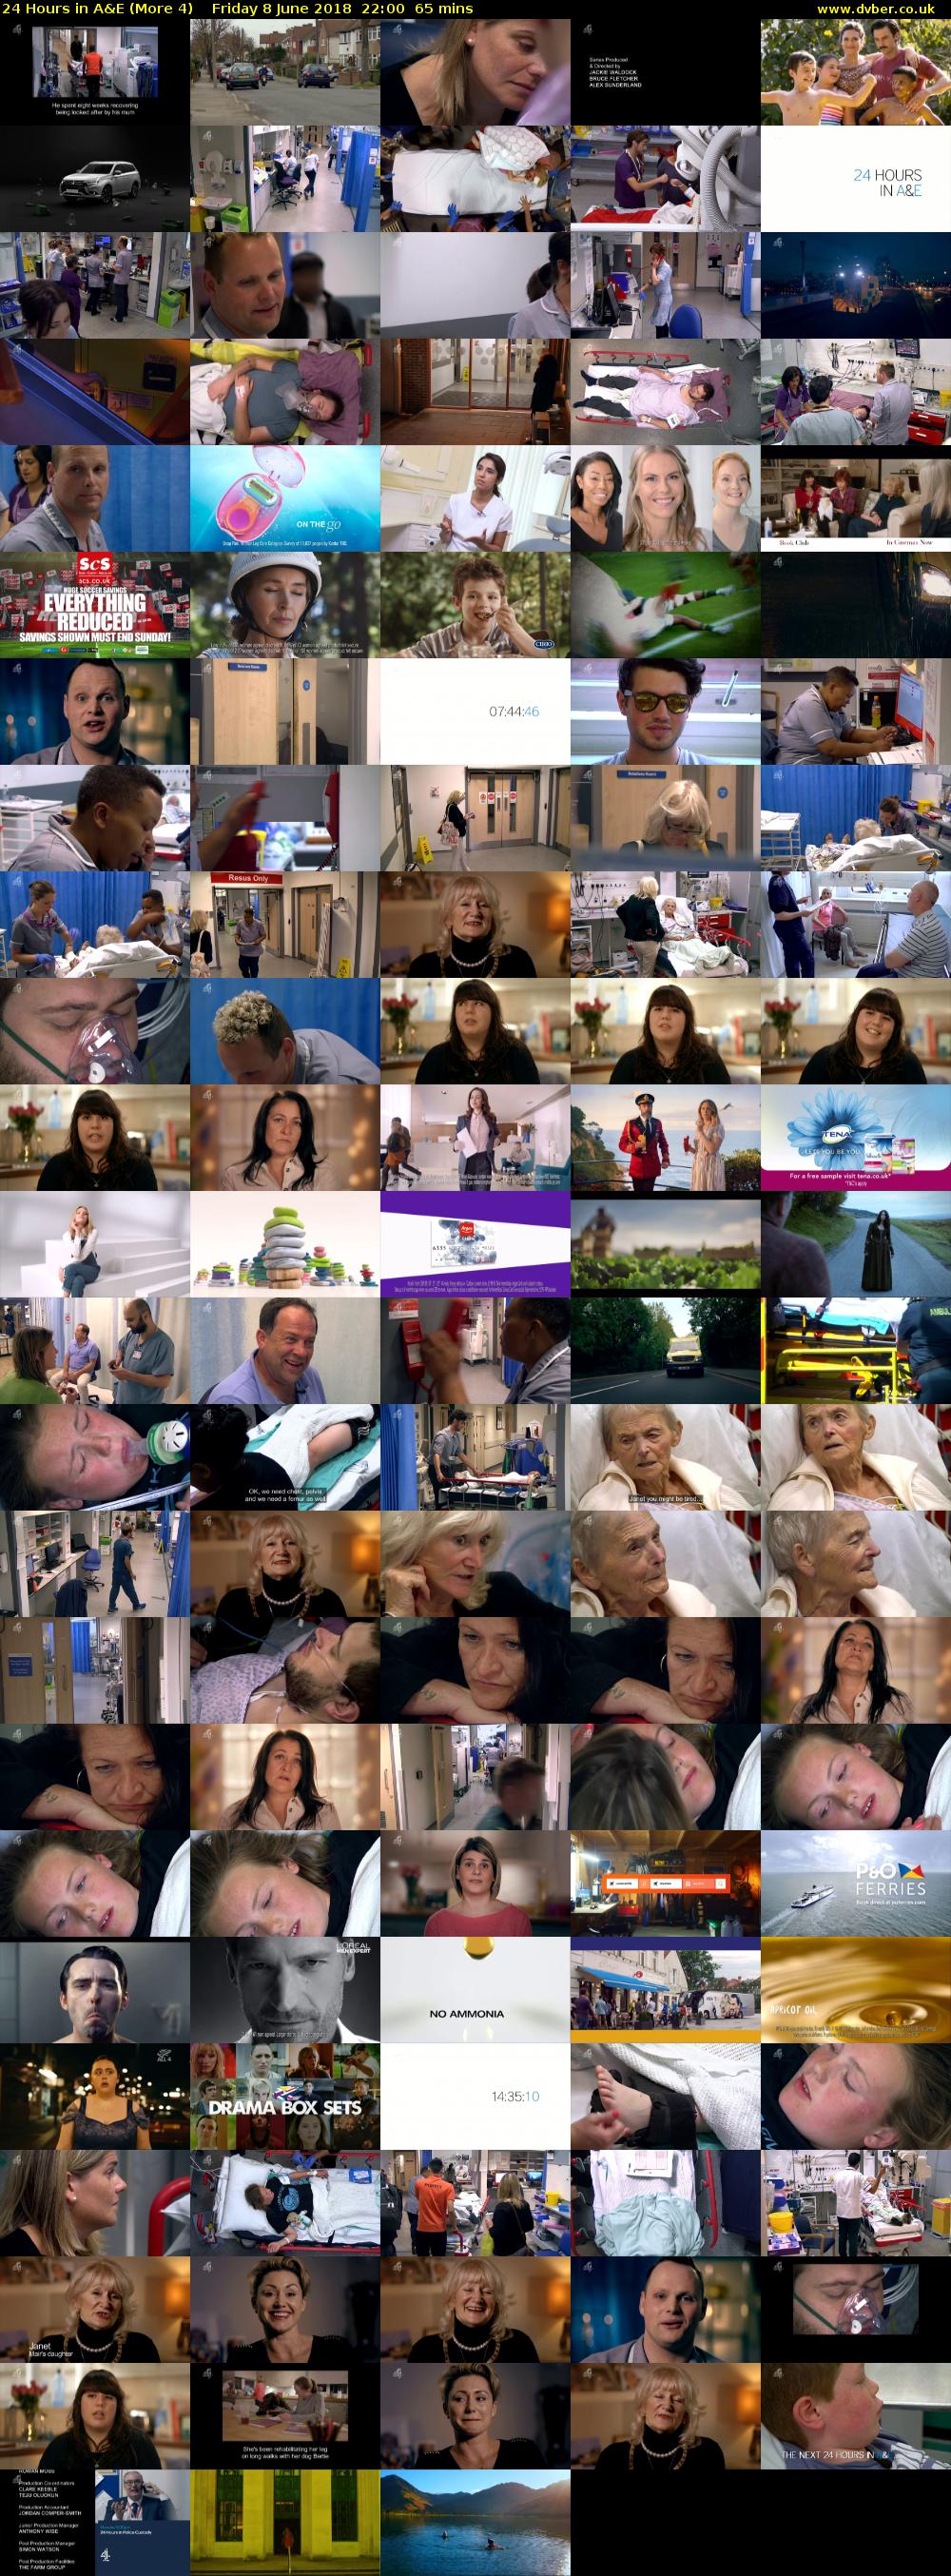 24 Hours in A&E (More 4) Friday 8 June 2018 22:00 - 23:05